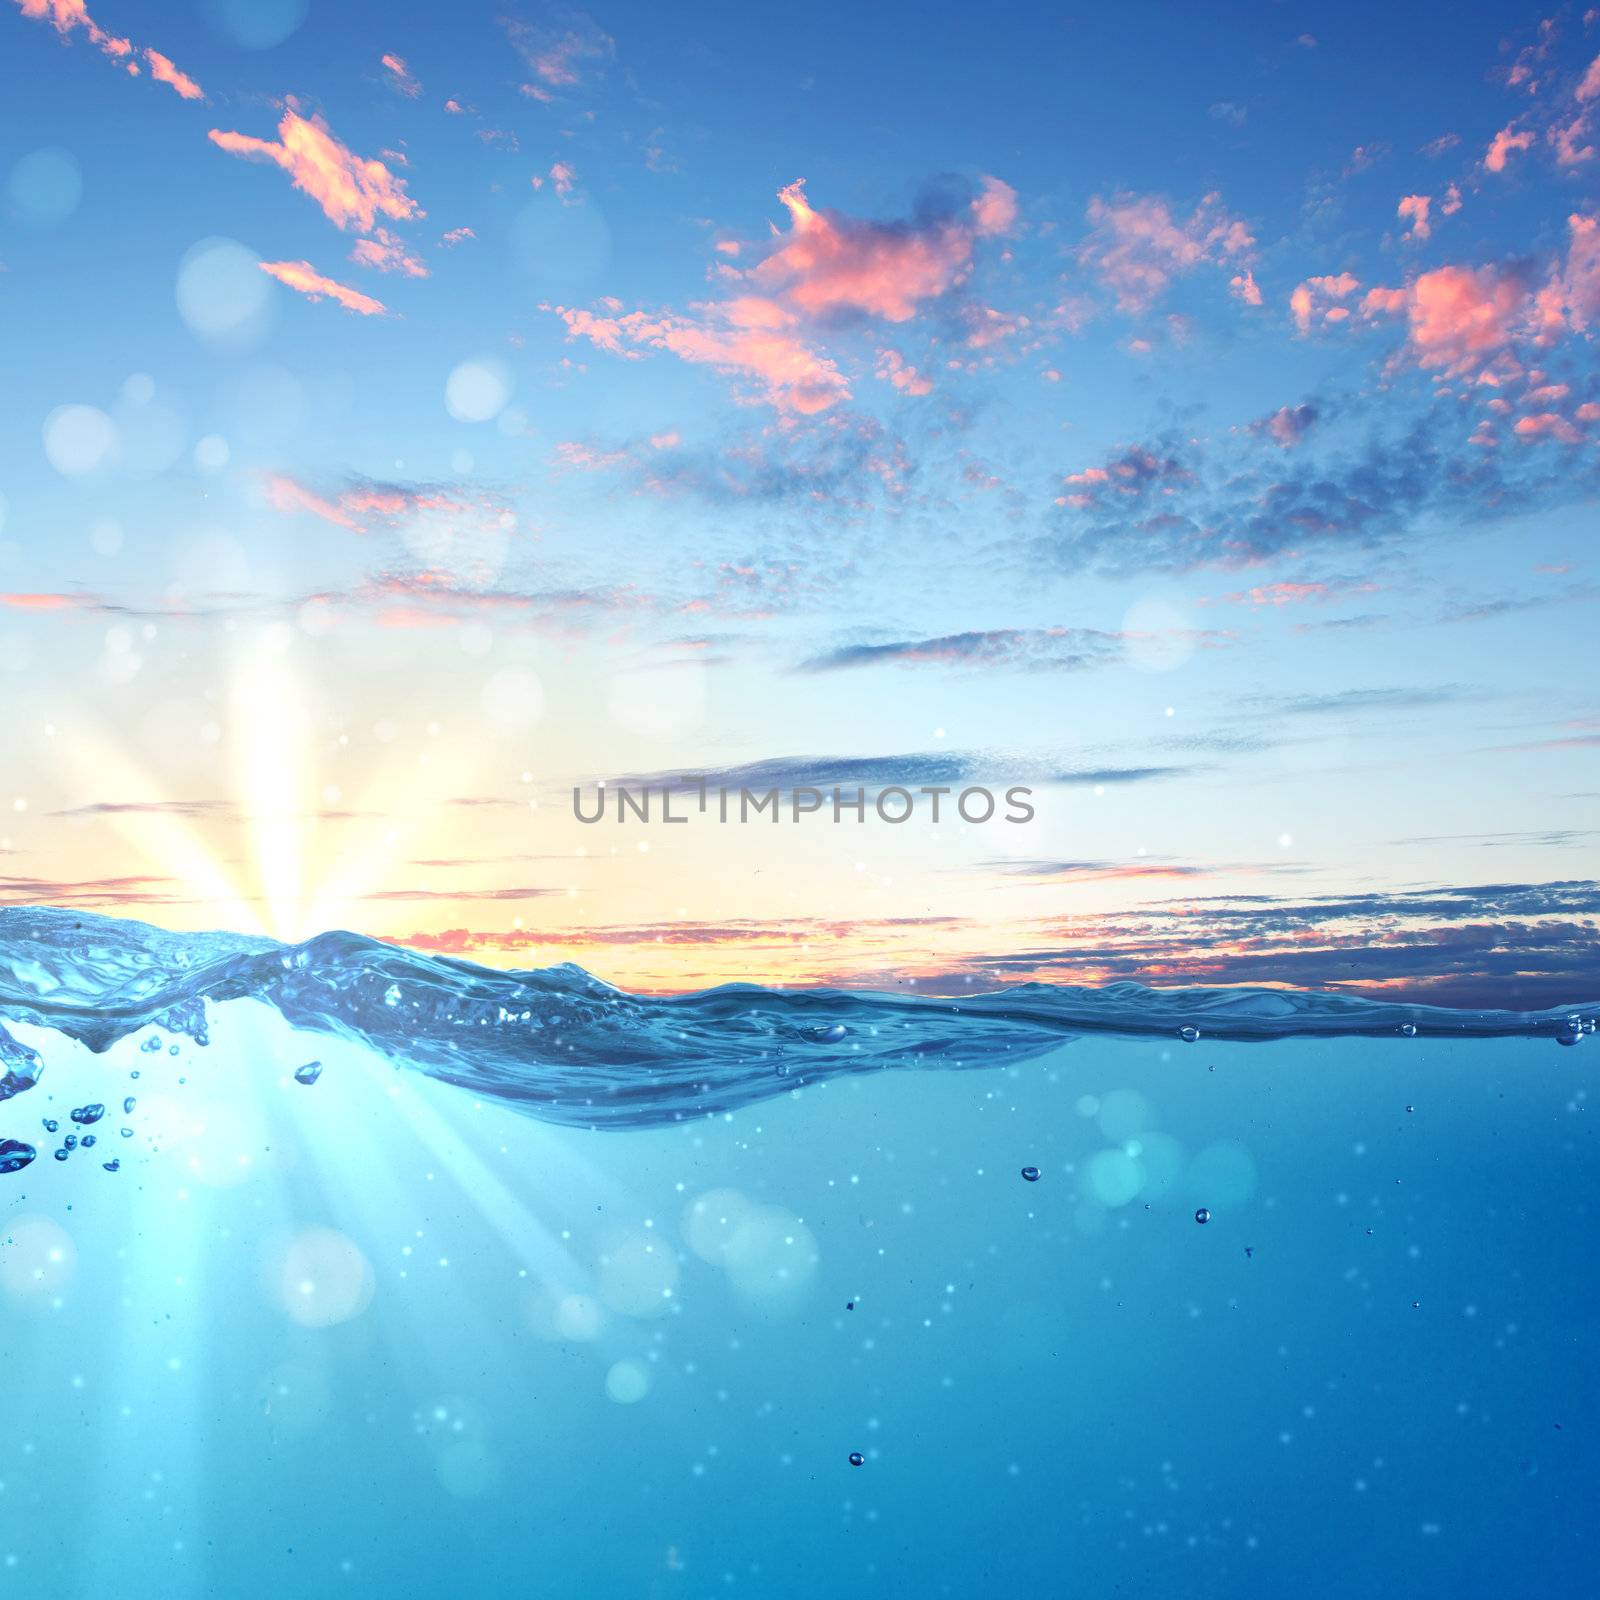 design template with underwater part and sunset skylight splitted by waterline